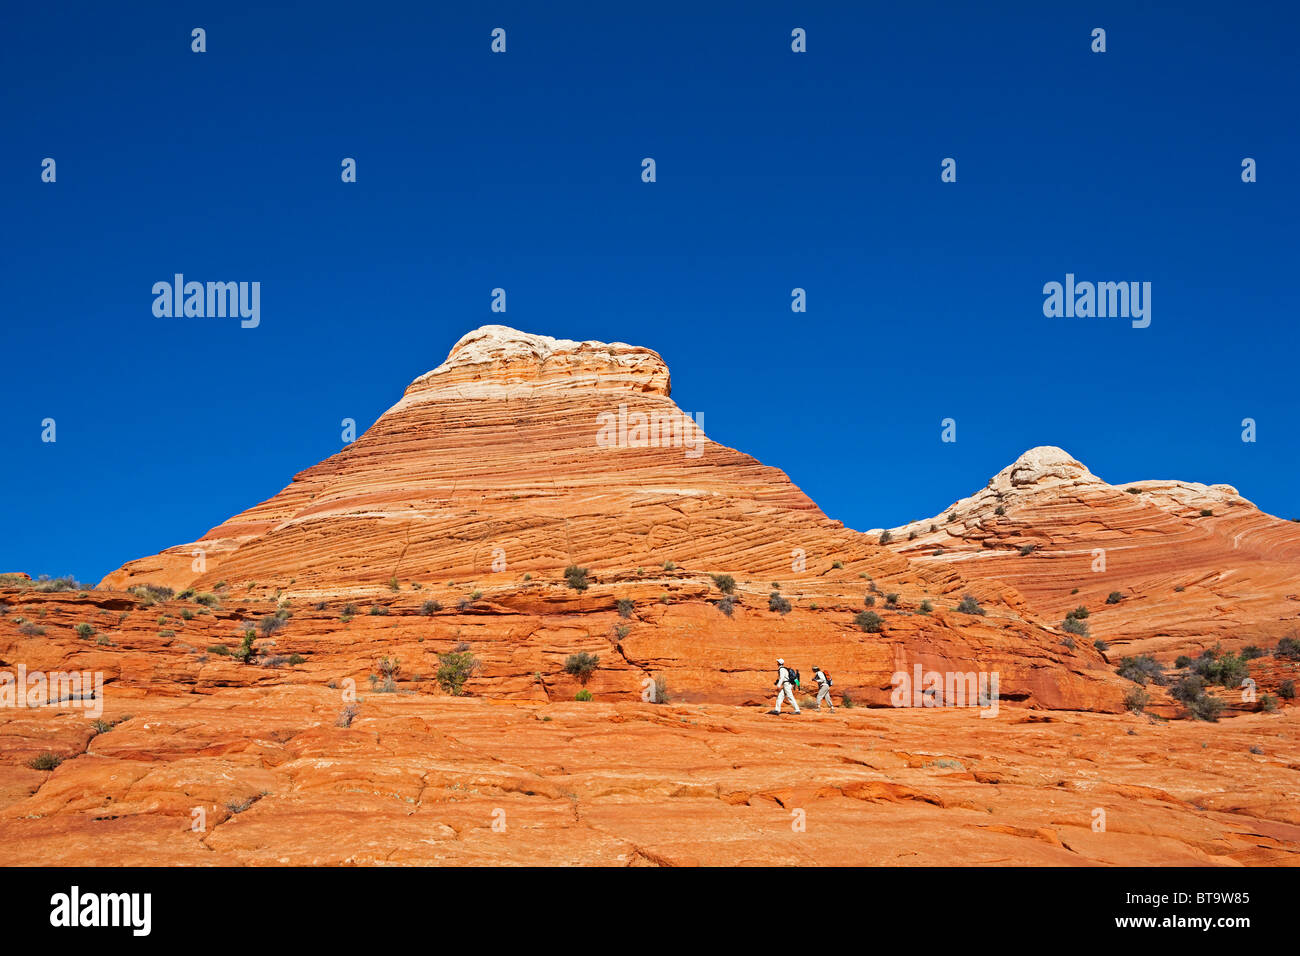 Hikers in Coyote Buttes North, Paria Canyon-Vermilion Cliffs Wilderness, Utah, Arizona, America, United States Stock Photo